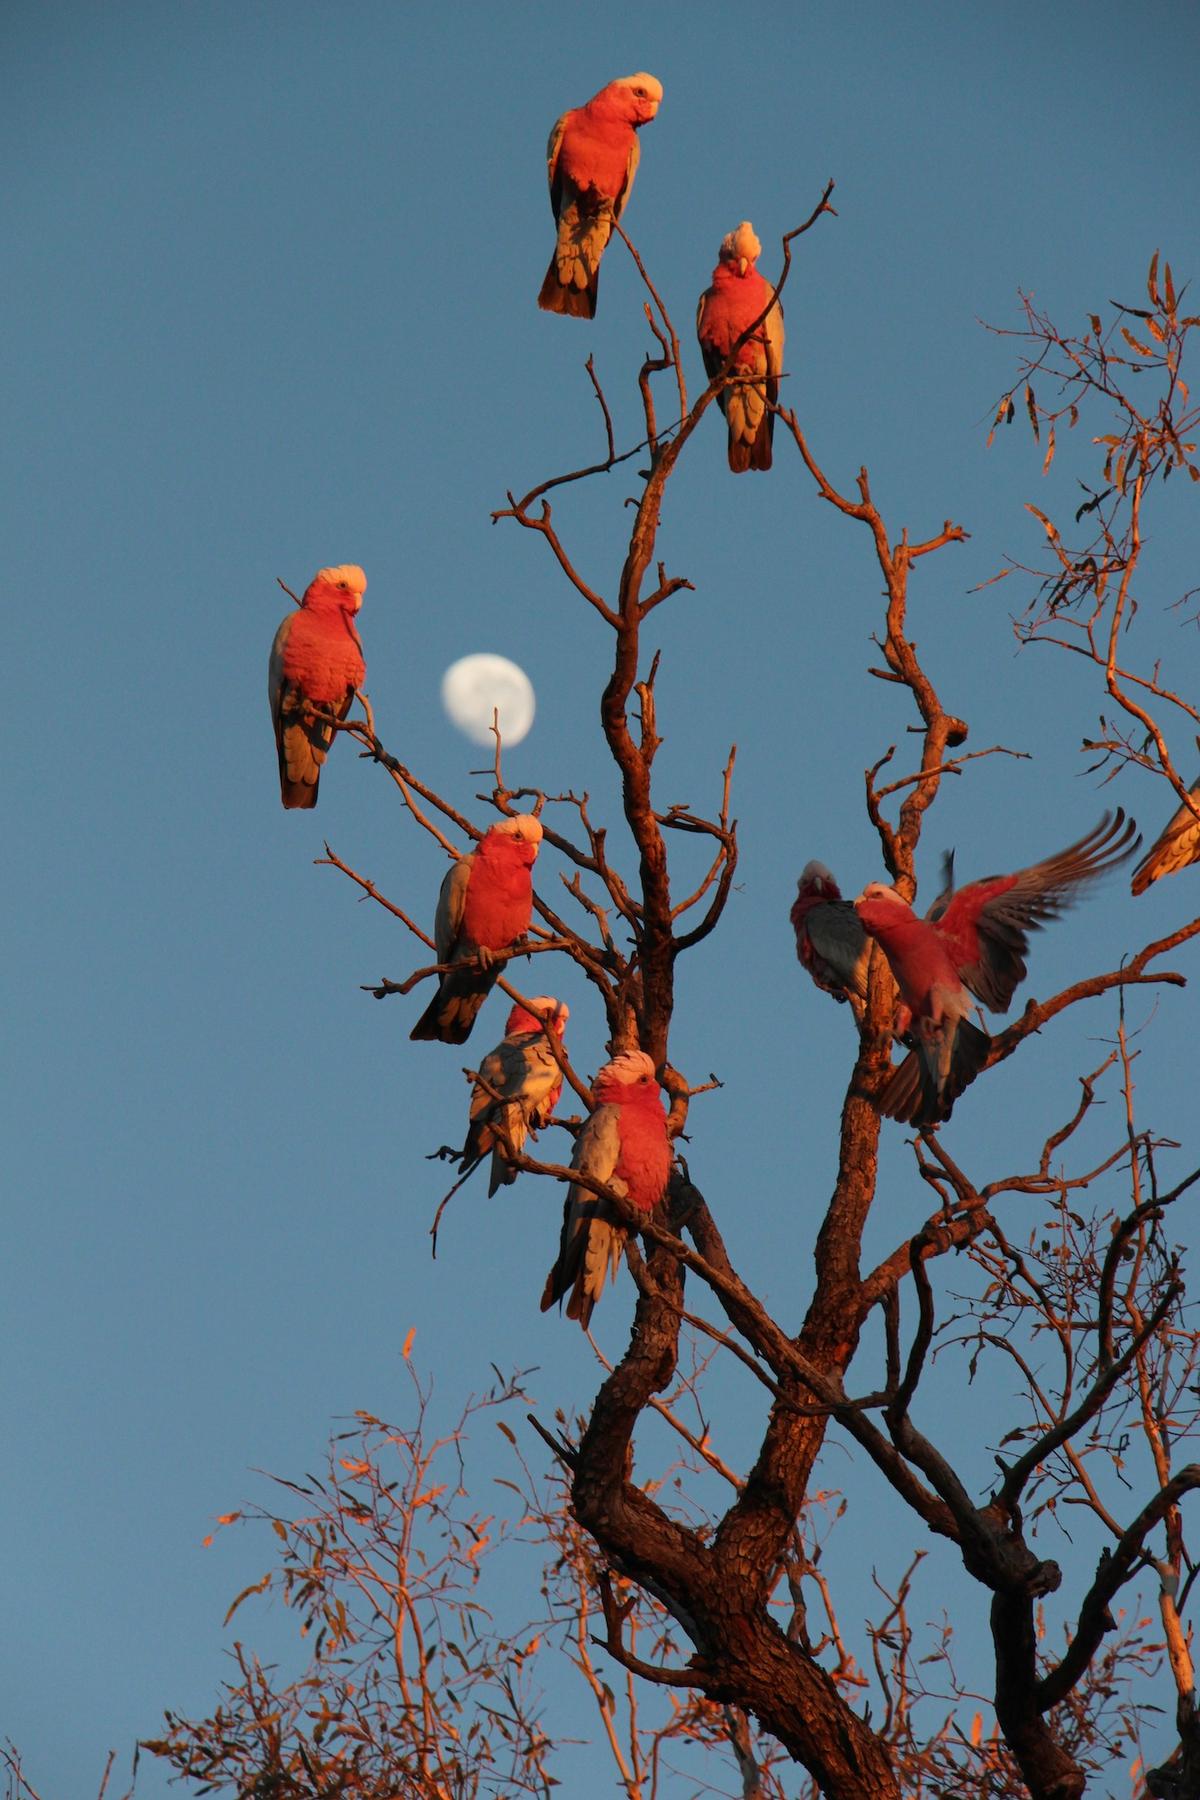 "GALAH MOON." (Courtesy of <a href="http://www.christianspencer.pro.br/PhotosNEW/index.html">Christian Spencer</a>)